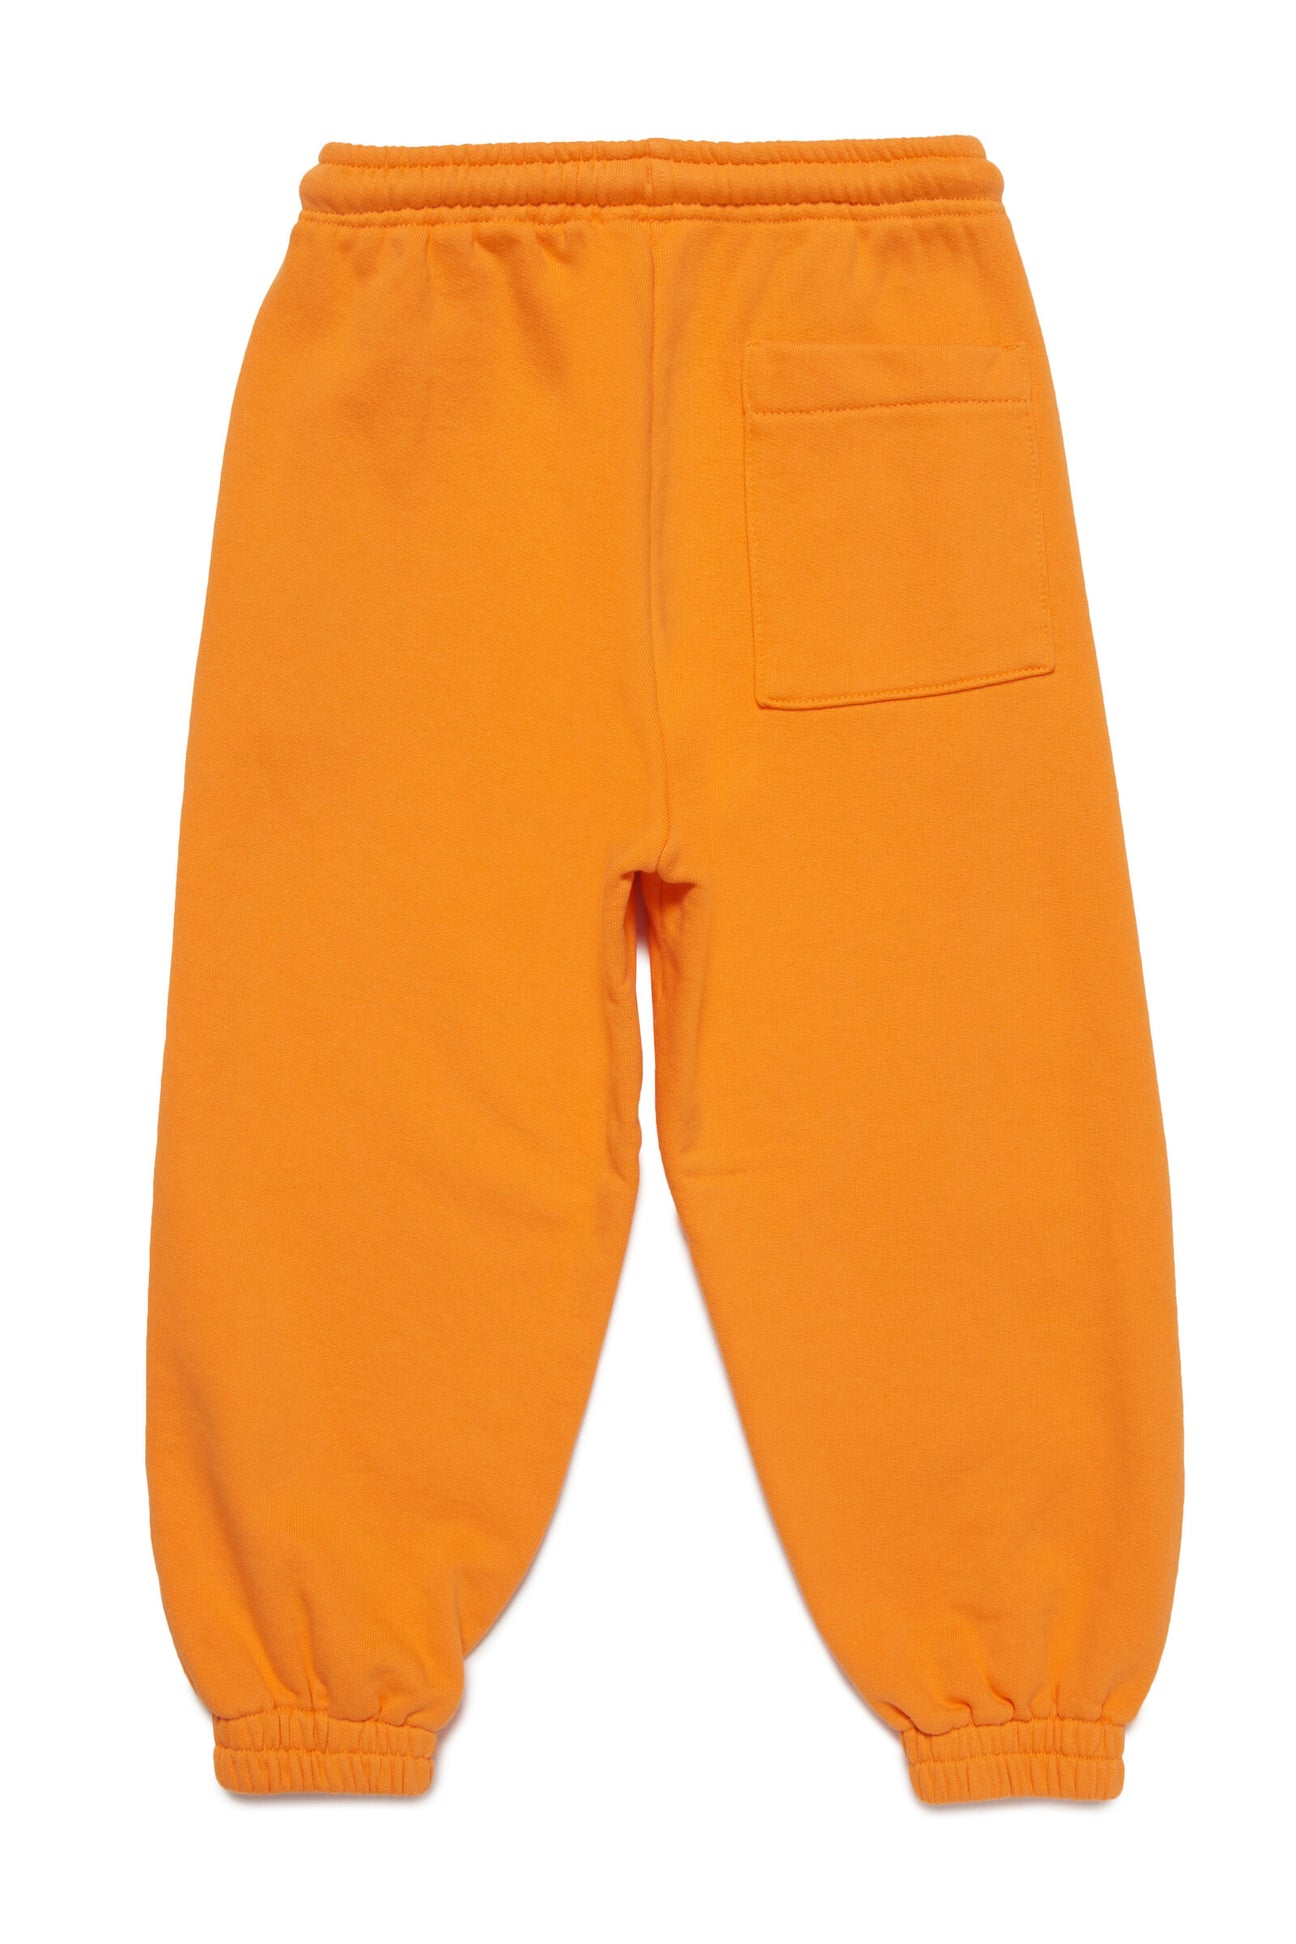 Deadstock orange plush jogger trousers with vertical logo Deadstock orange plush jogger trousers with vertical logo